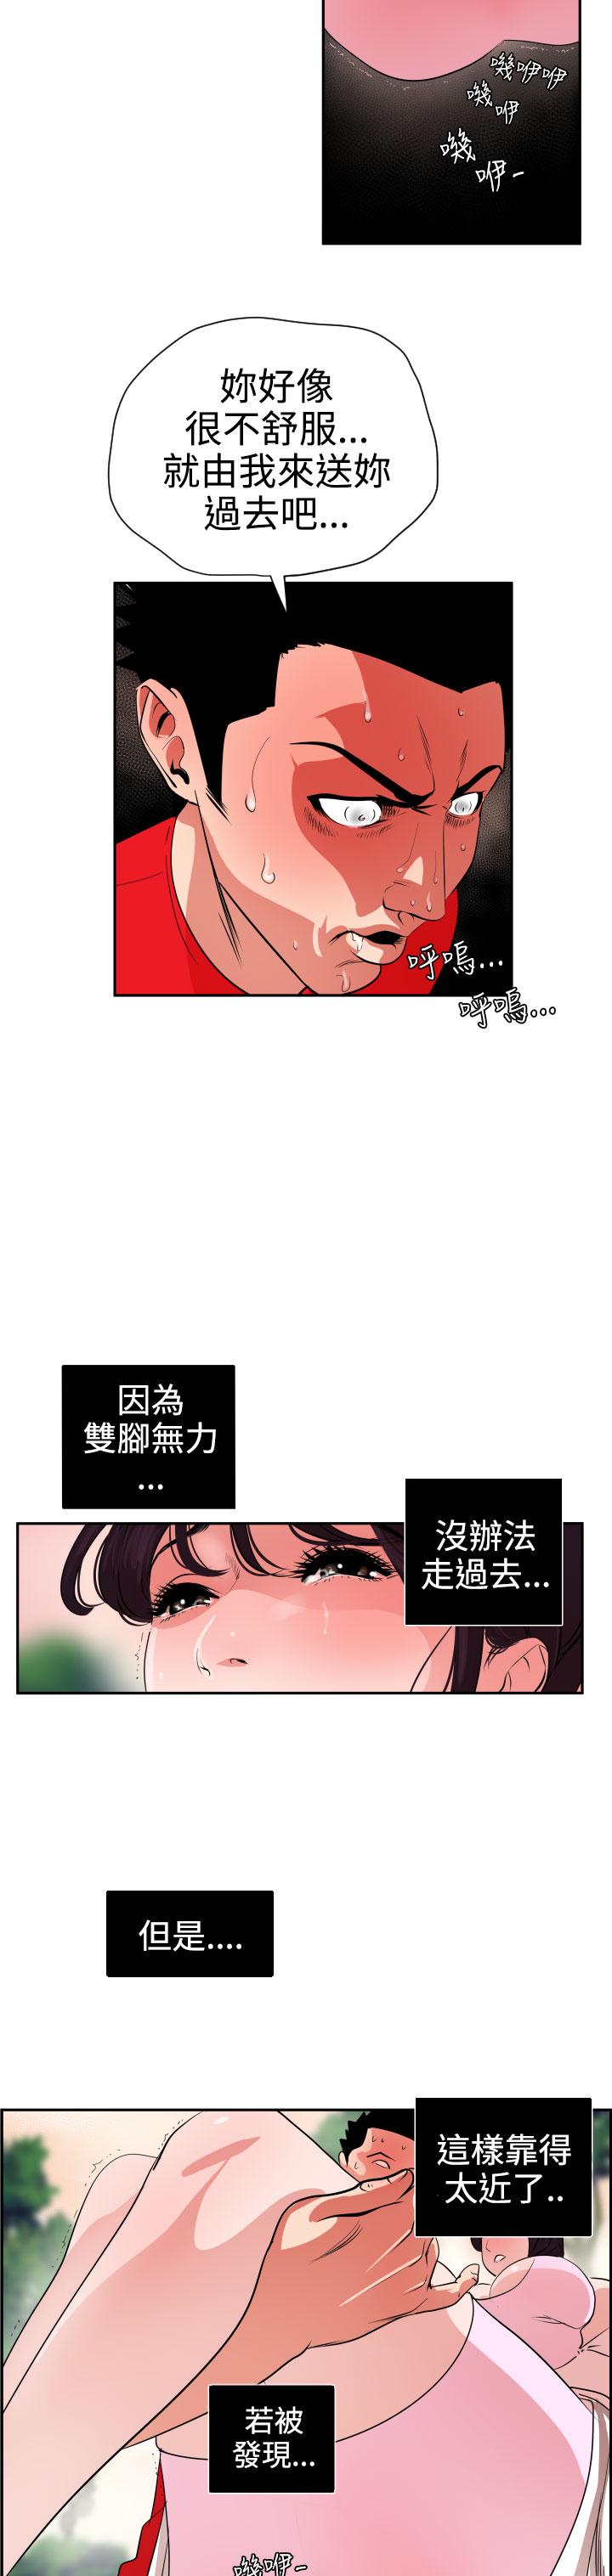 Desire King (慾求王) Ch.1-12 (chinese) 307